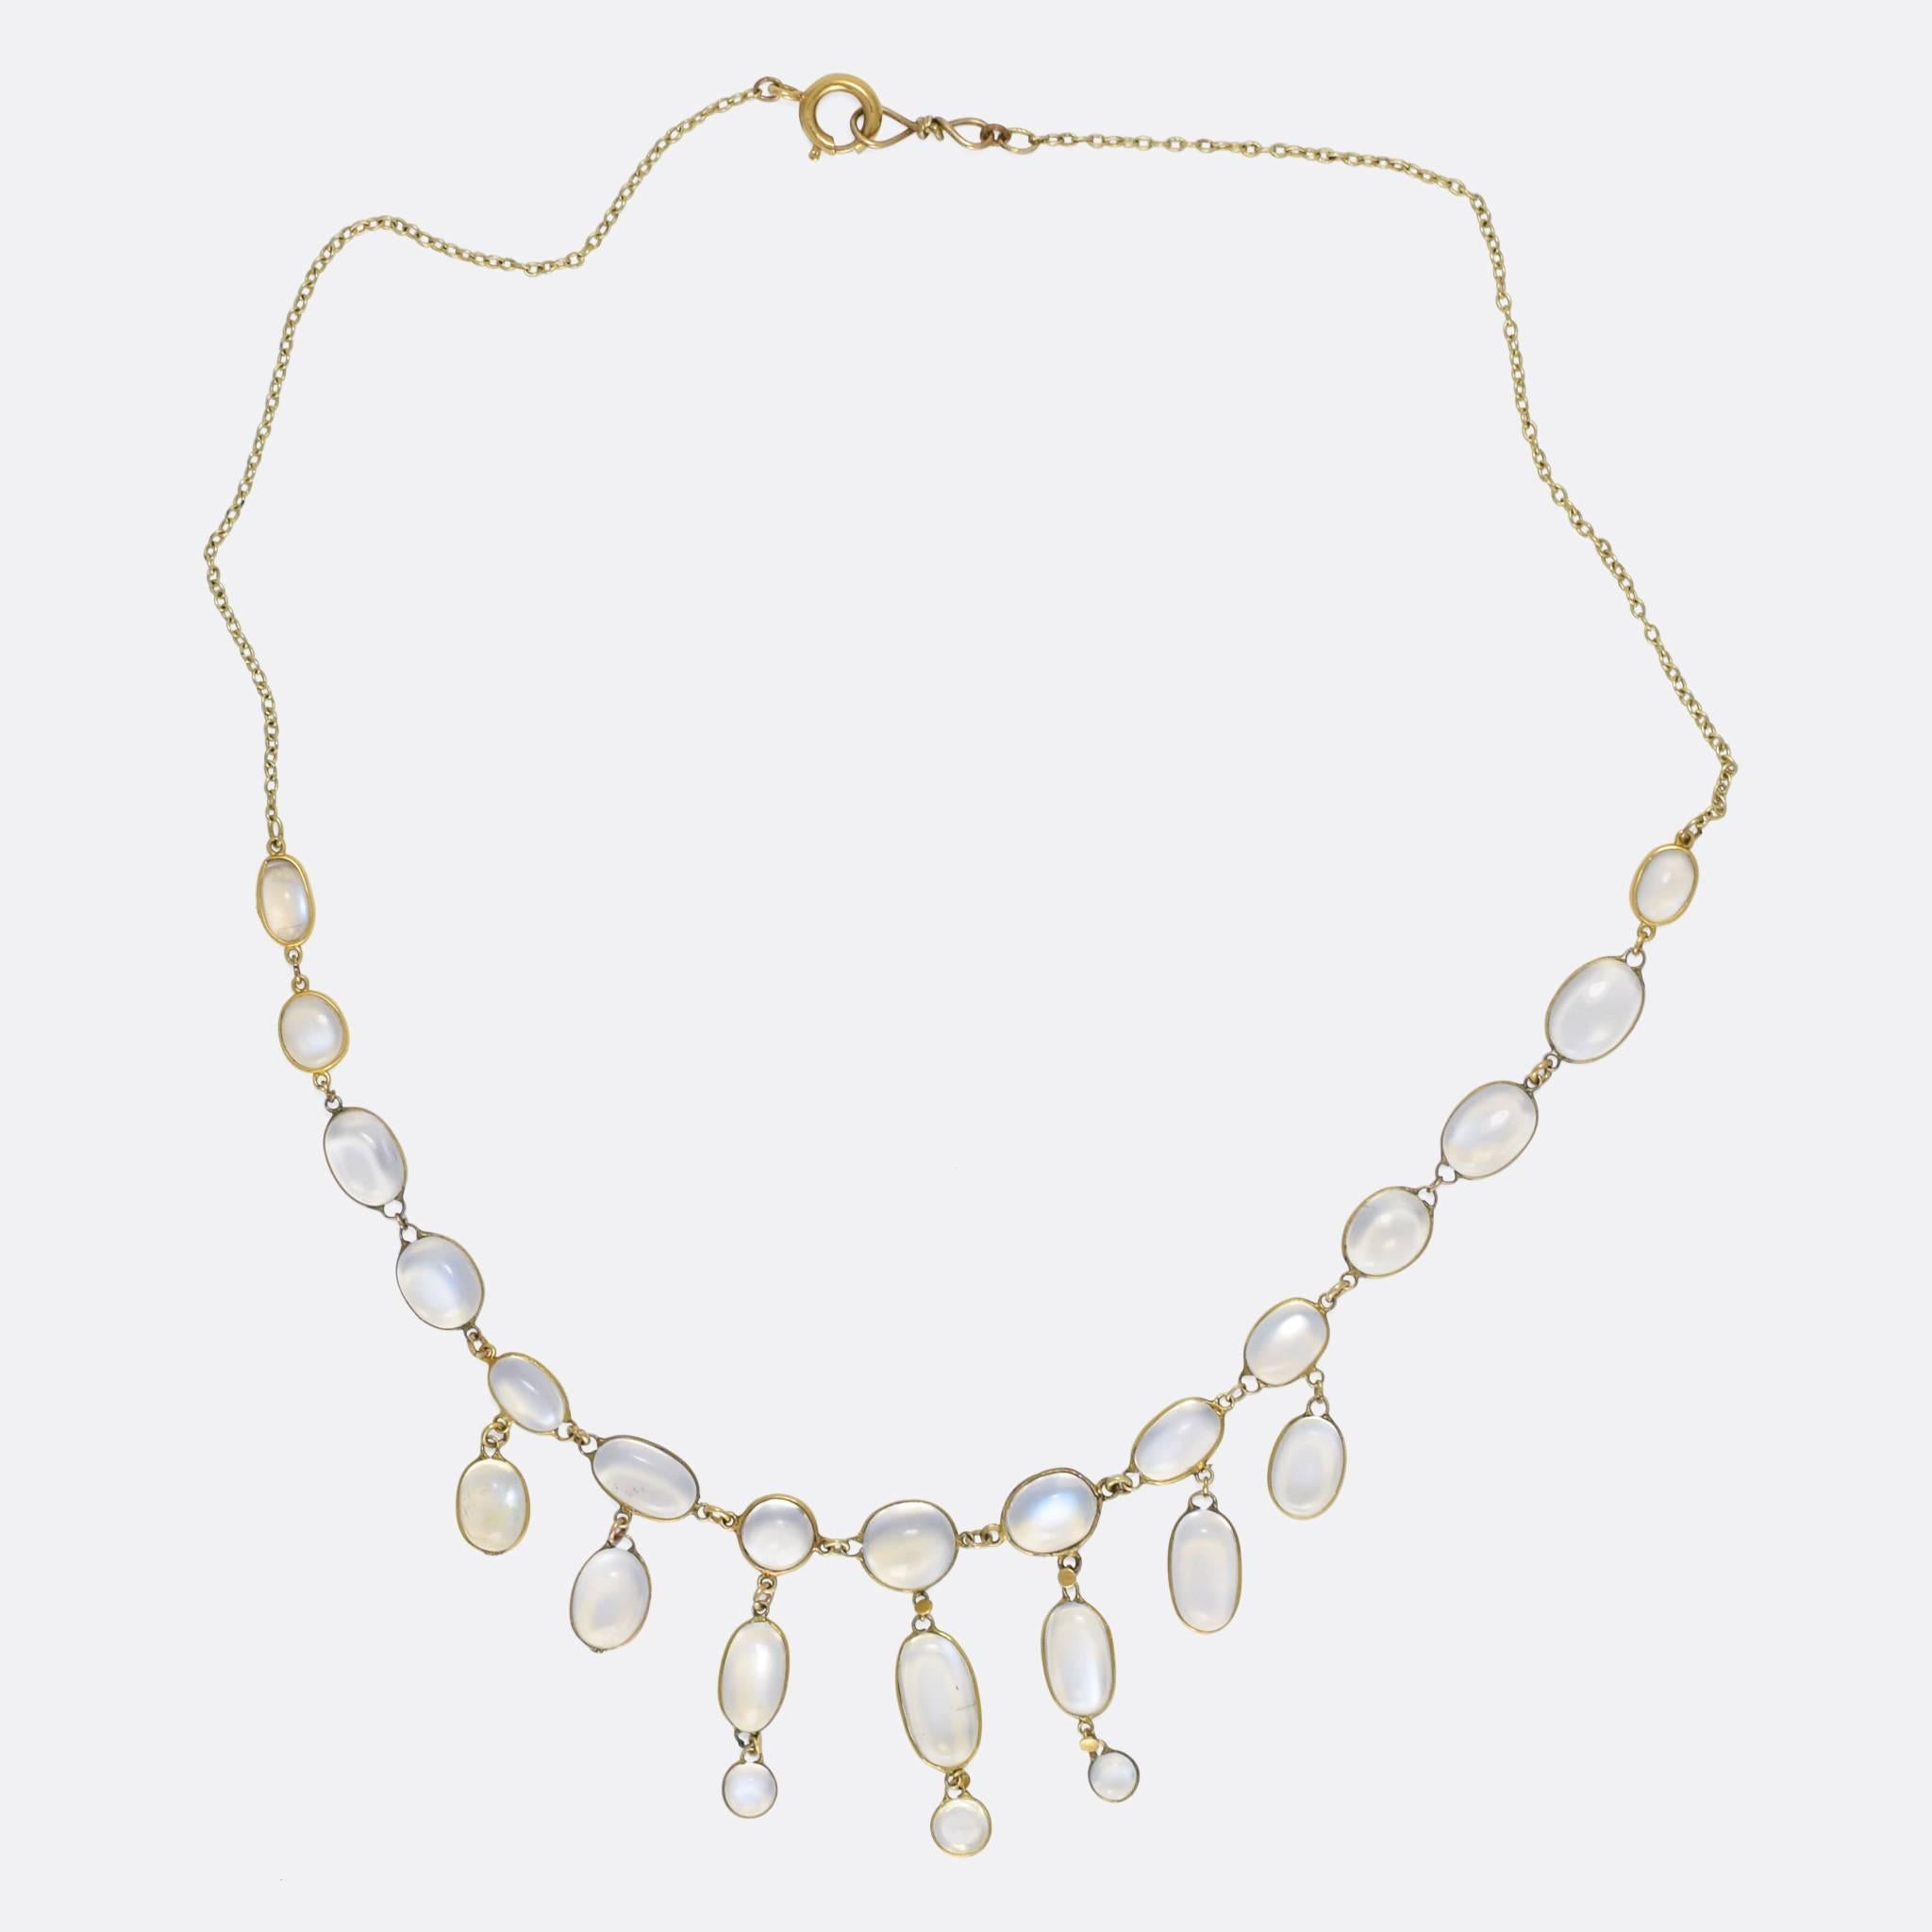 A wonderful blue moonstone festoon necklace, set with 25 cabochon stones in three tiers. The moonstones display strong adularescence - the effect whereby they appear to glow brightly from within - and rest in 15k gold mounts on a fine trace chain.